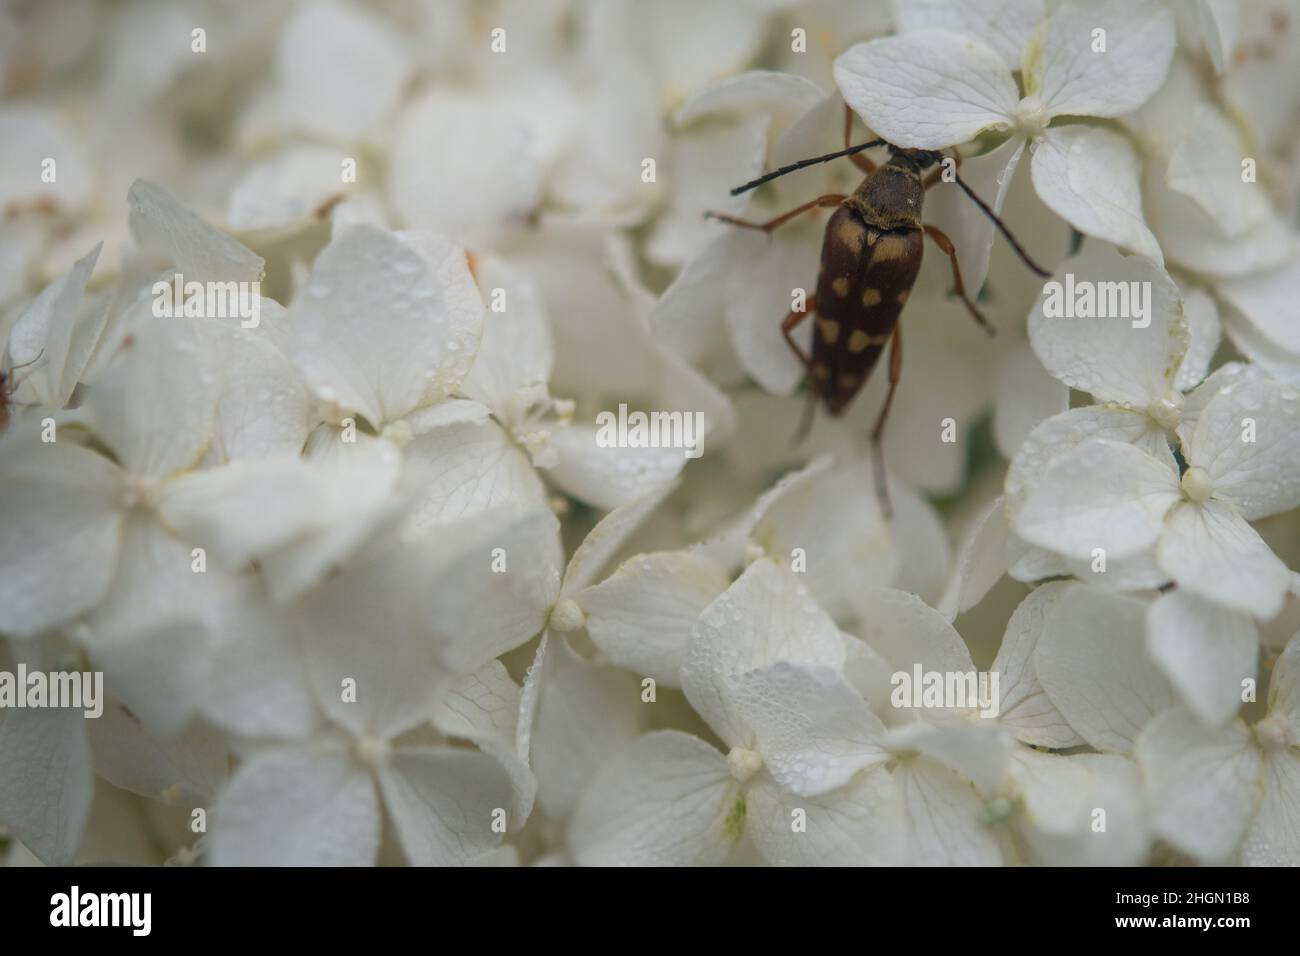 Colorful beetle crawling among flower petals Stock Photo